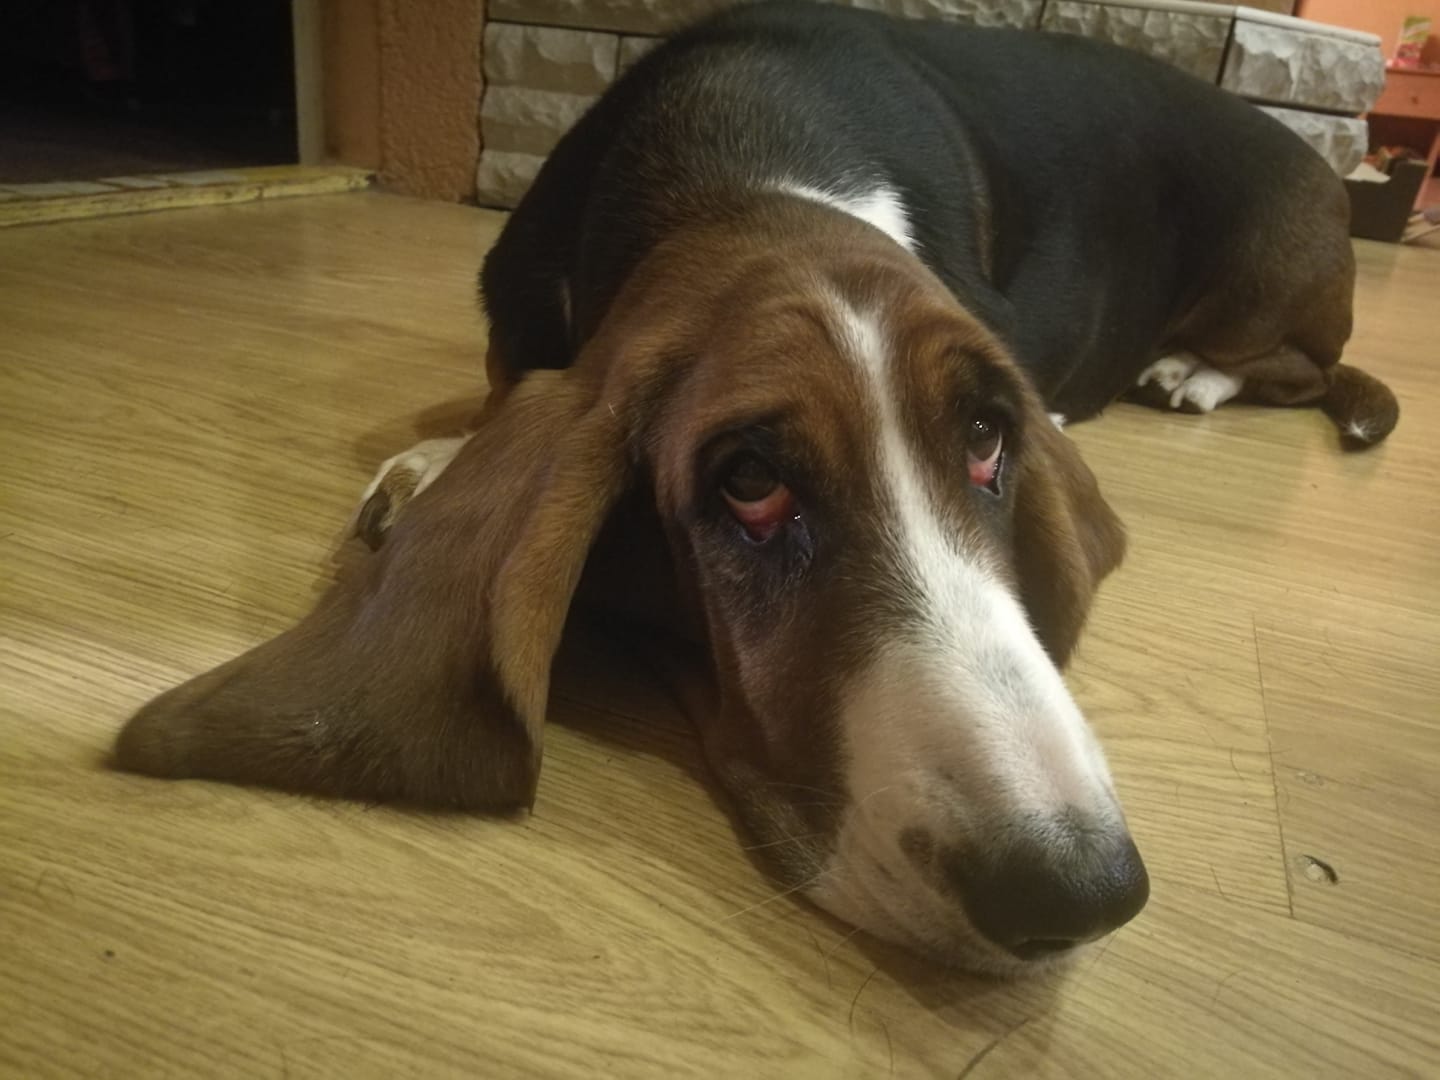 A Basset Hound lying on the floor with its tired face